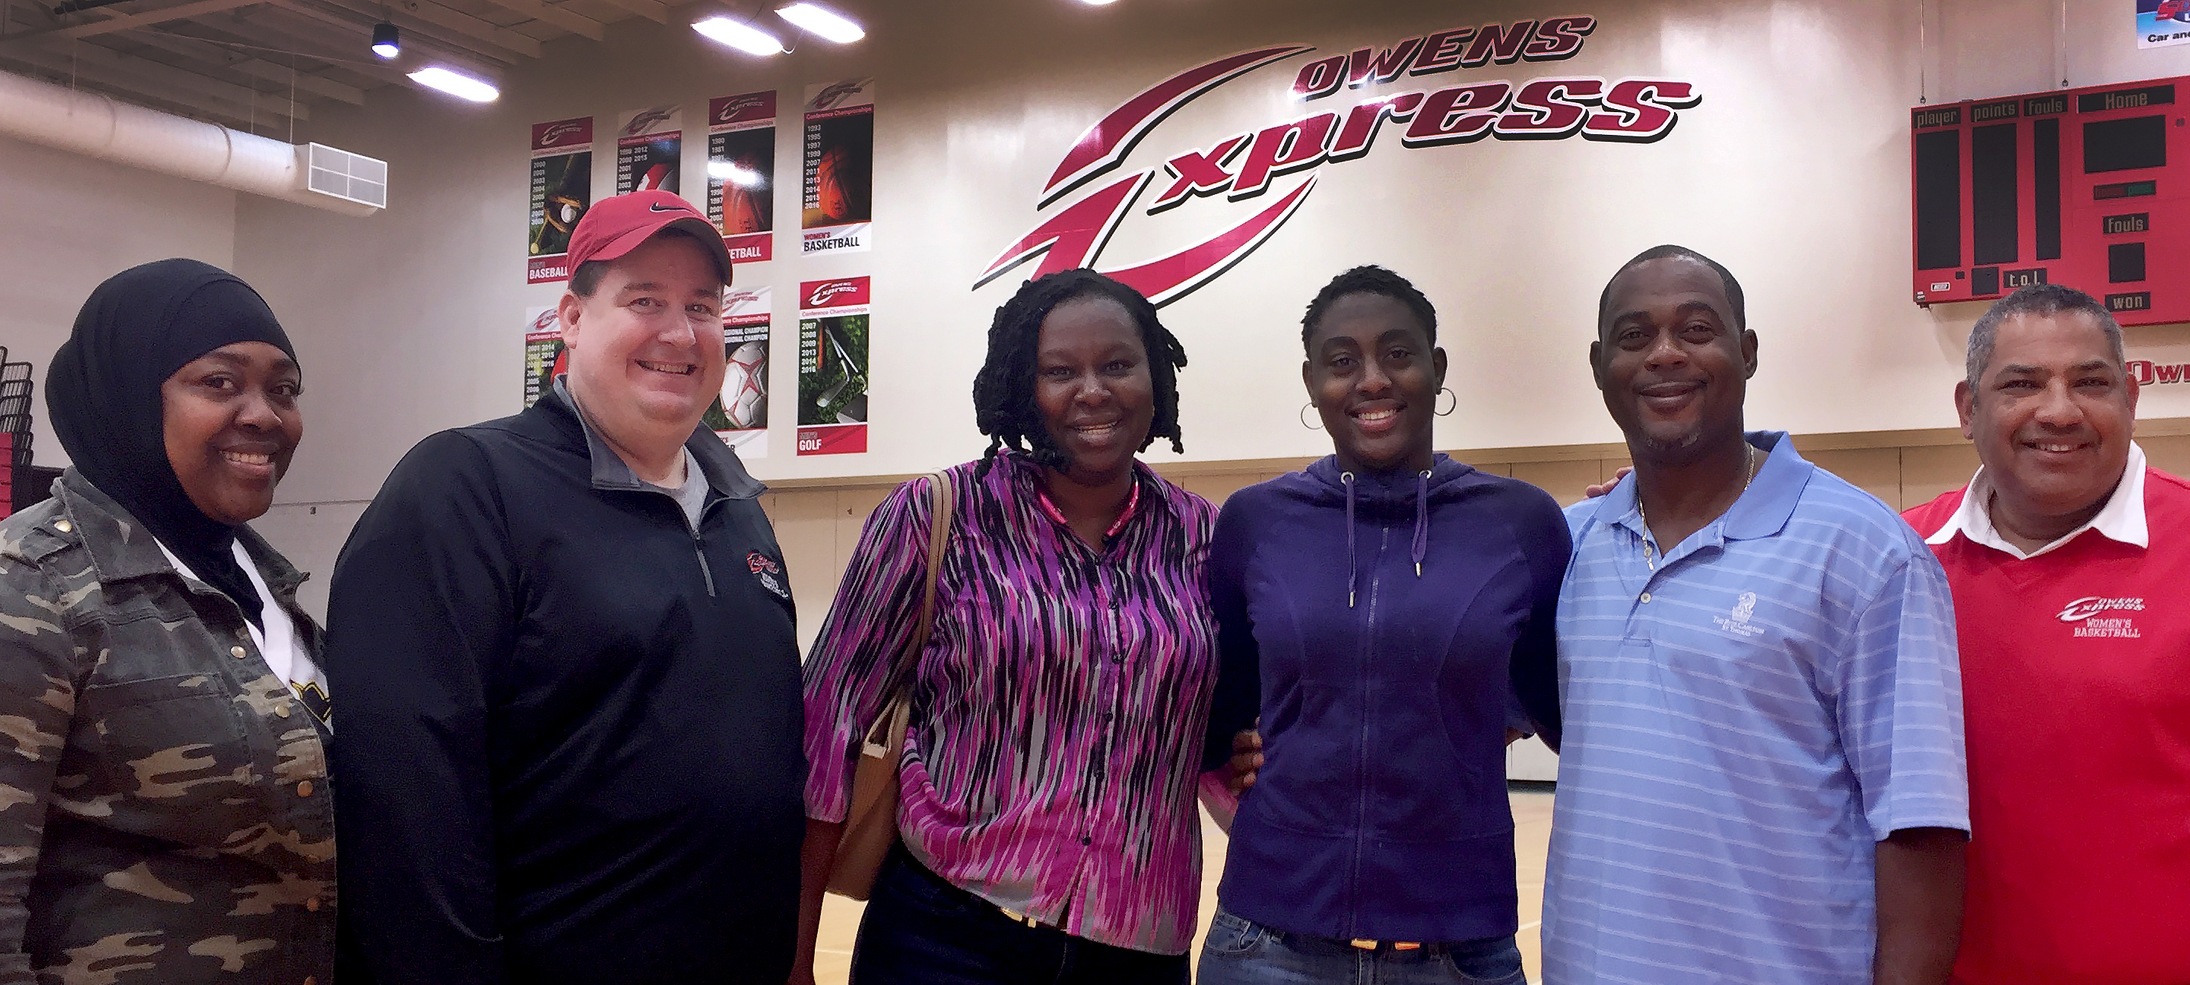 Alexis Boston, third from the right, is pictured with her parents and the Owens women's basketball coaching staff. Photo by Owens Sports Information